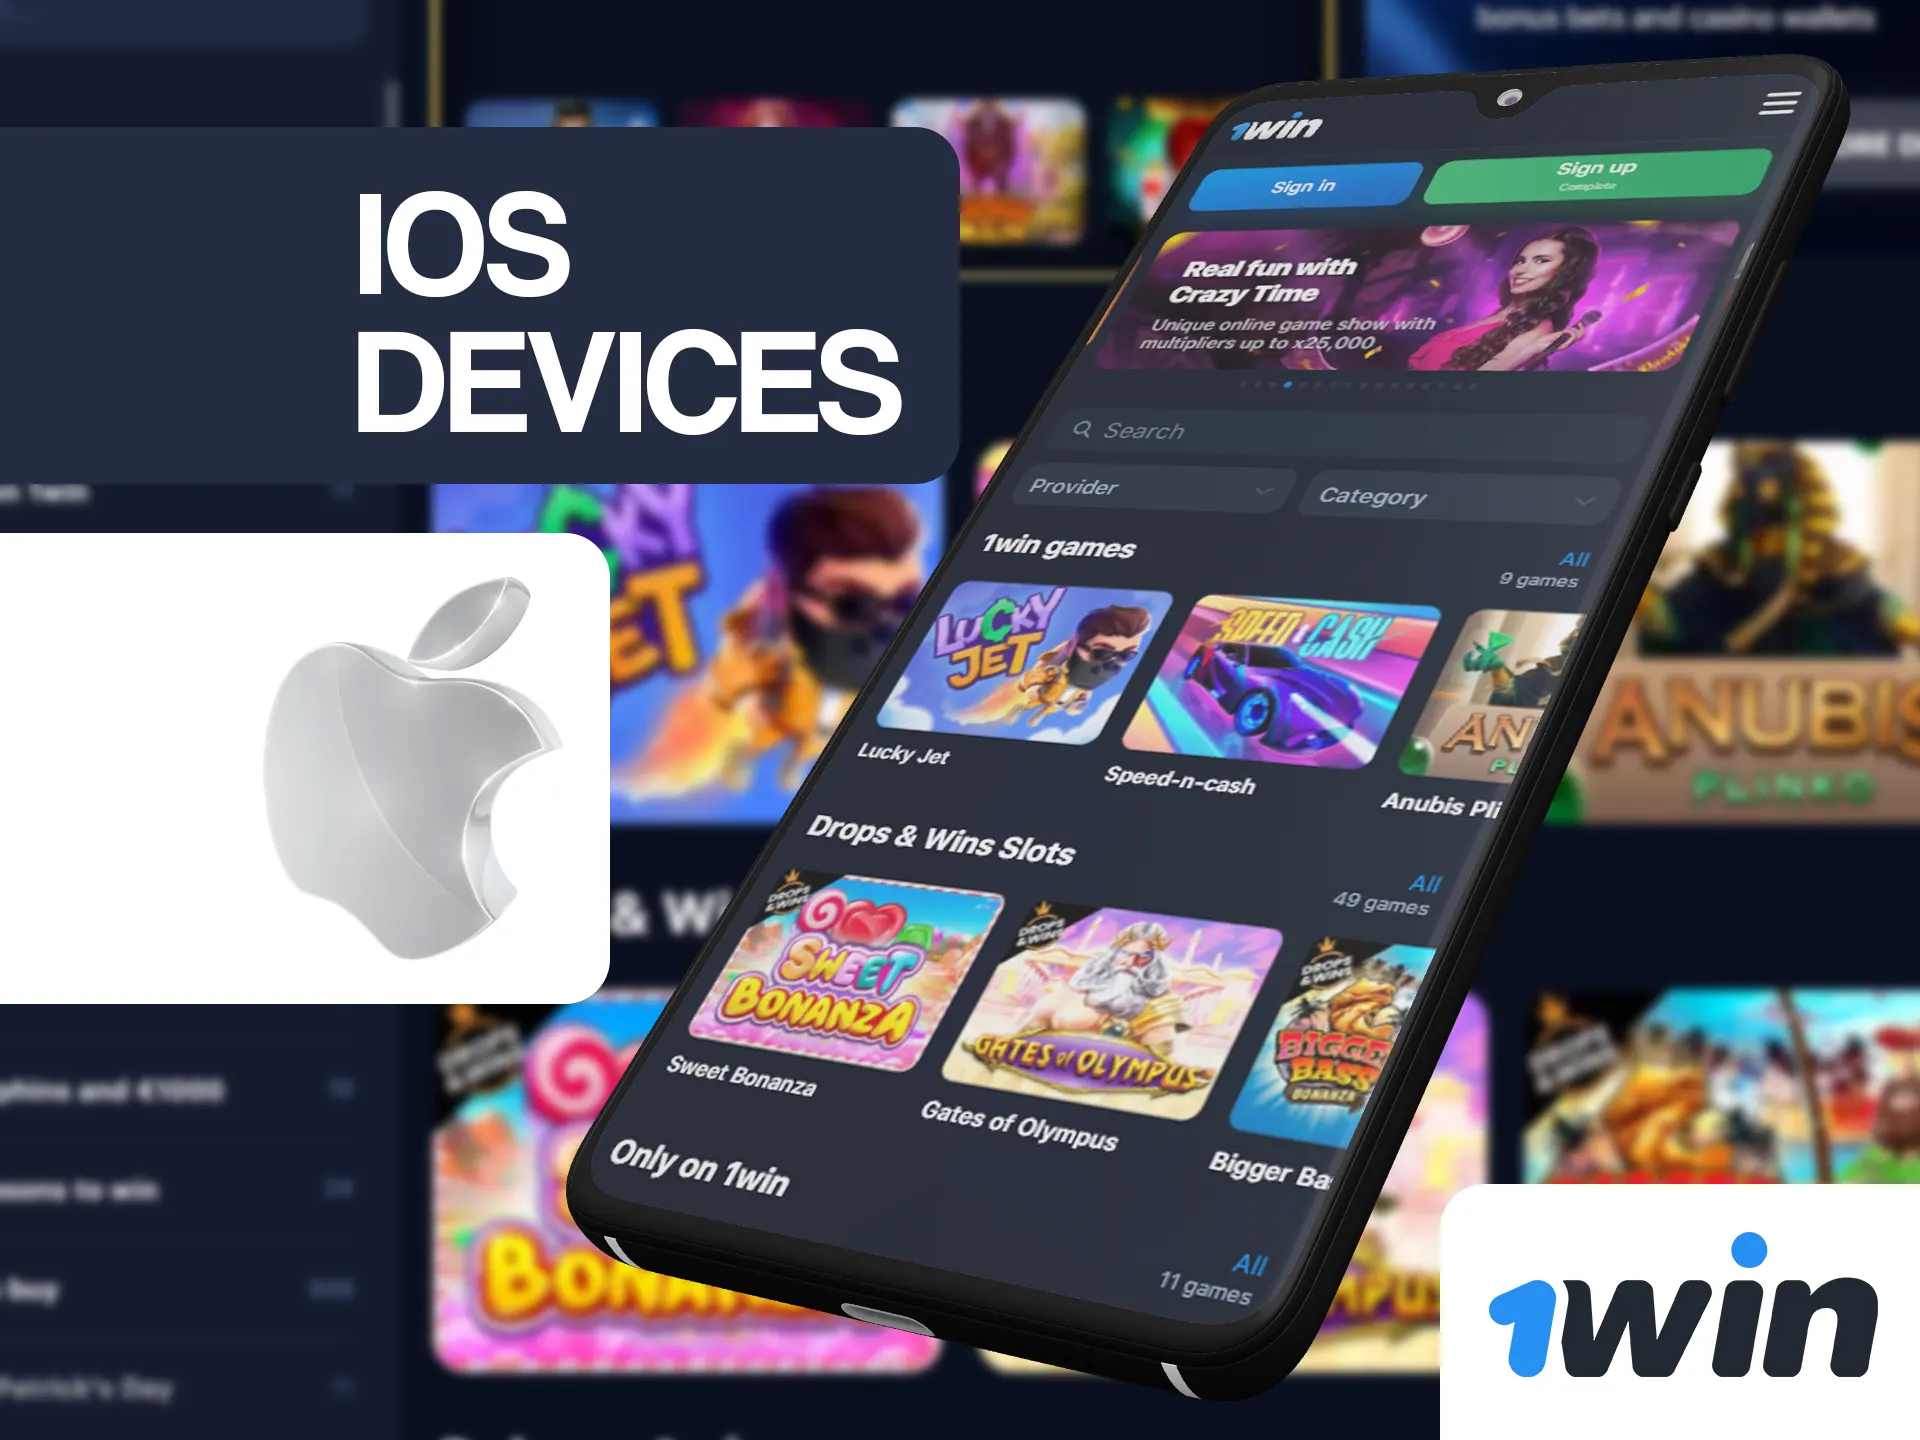 You can install 1win iOS app on almost any of iOS devices.